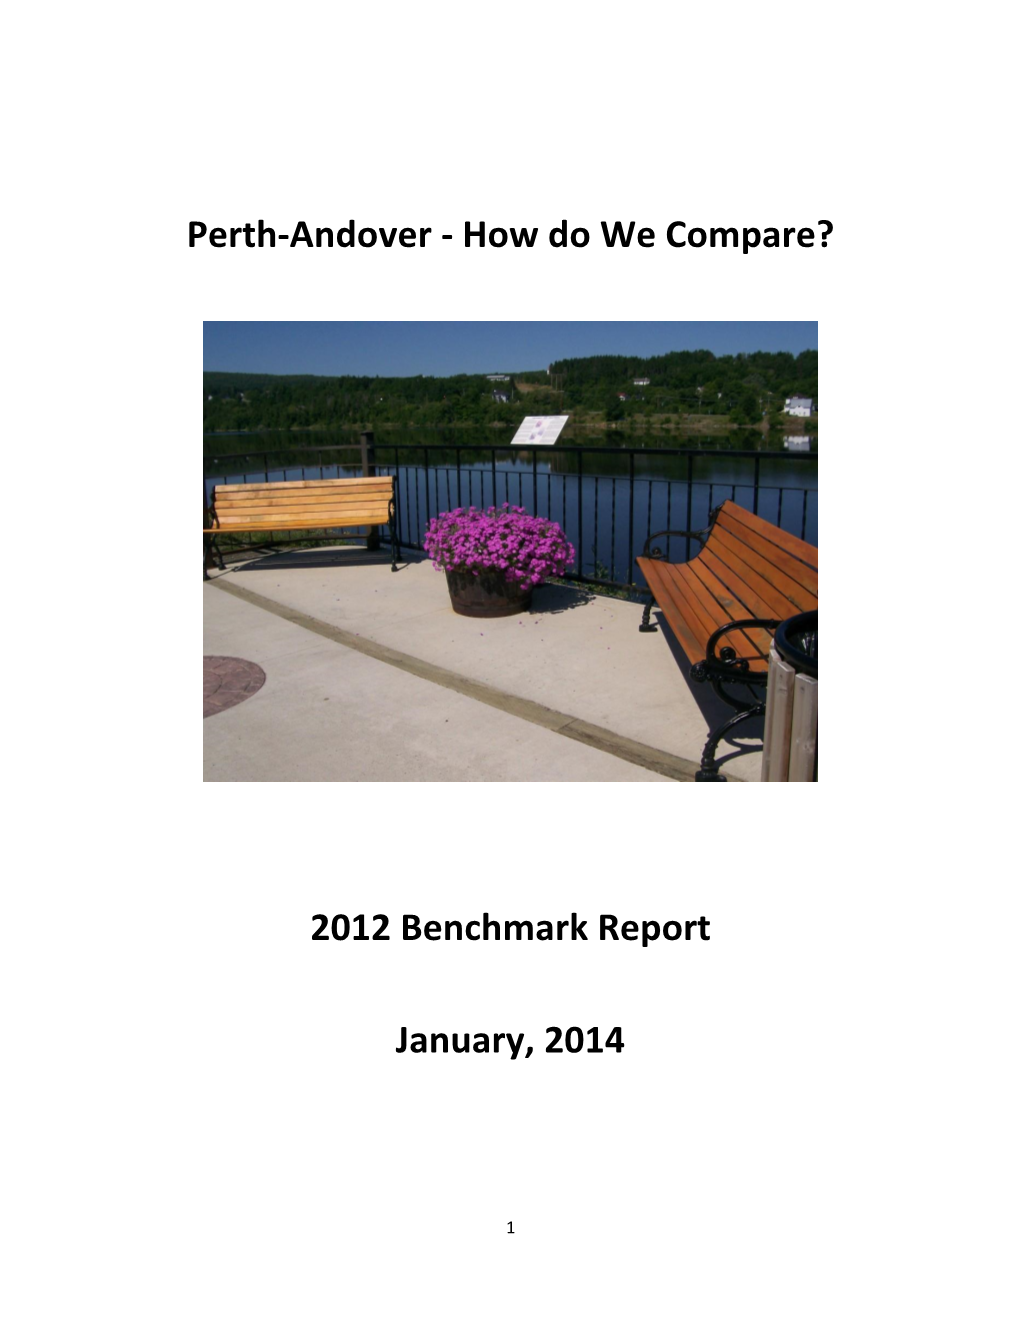 Benchmark Report 2013 2013 2013 Categories Perth-Andover Group Avg Provincial Avg